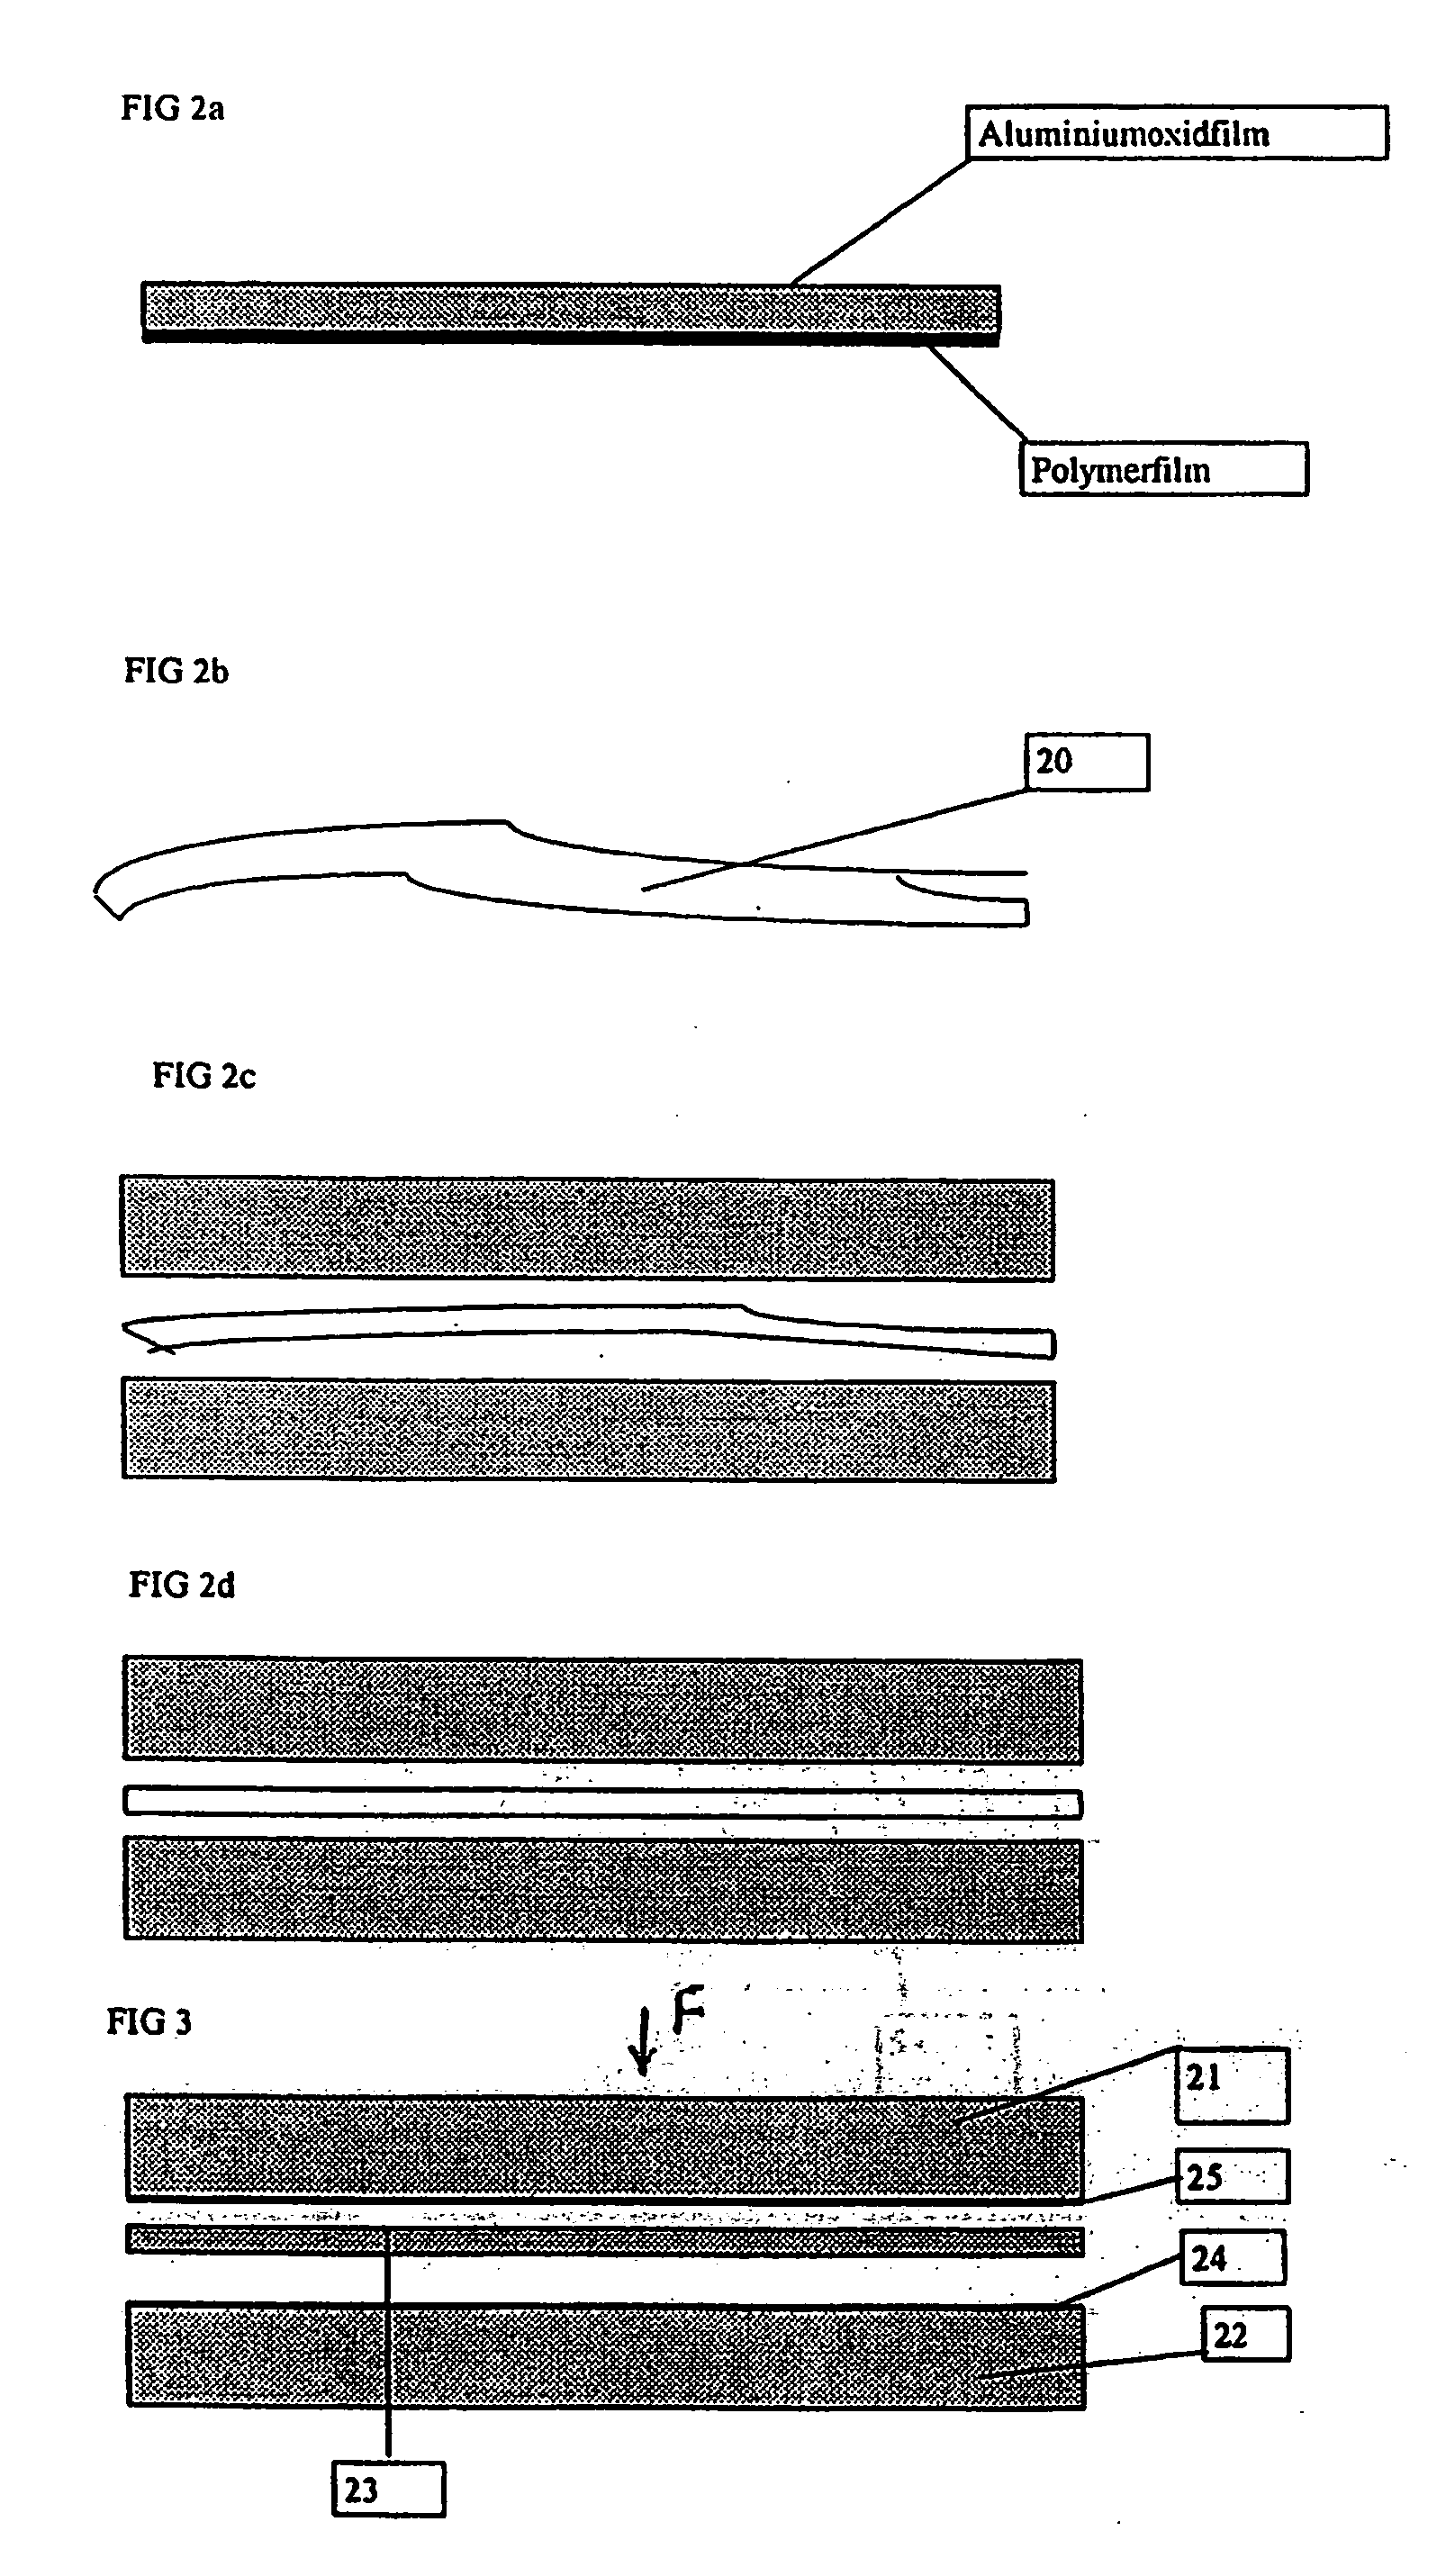 Method for producing a pressure sensor for detecting small pressure differences and low pressures